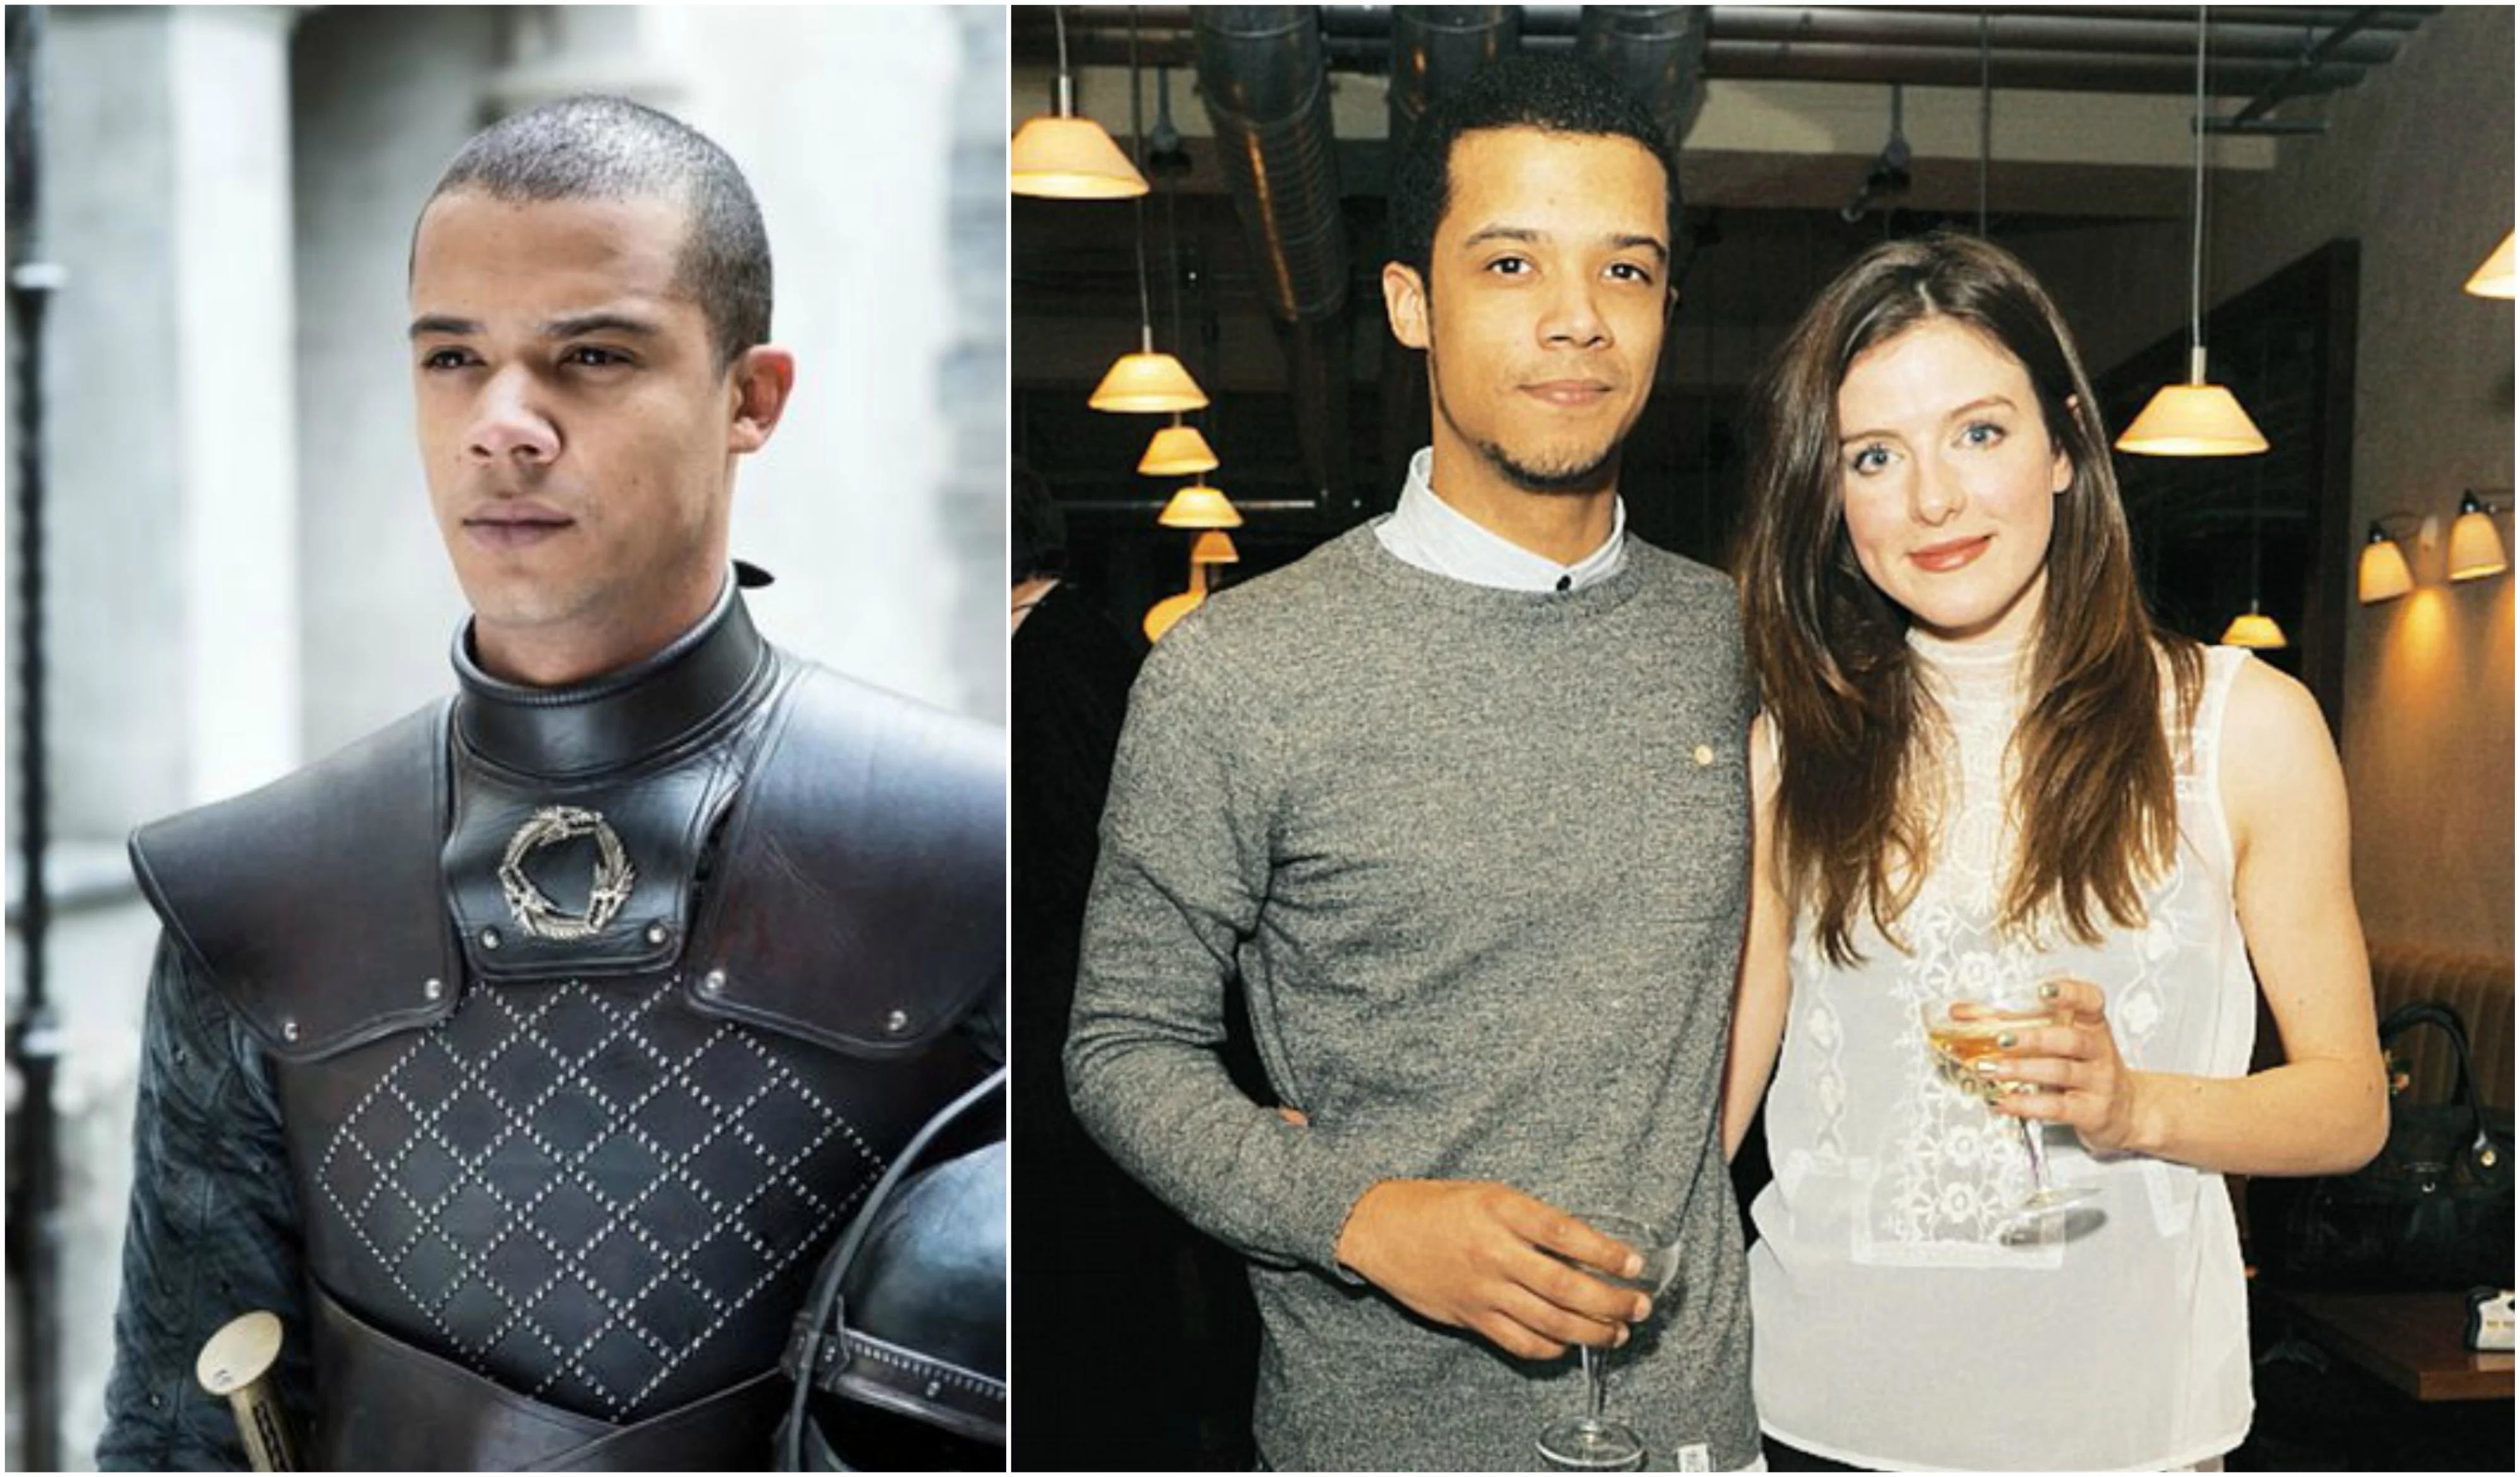 Jacob Anderson and Aisling Loftus